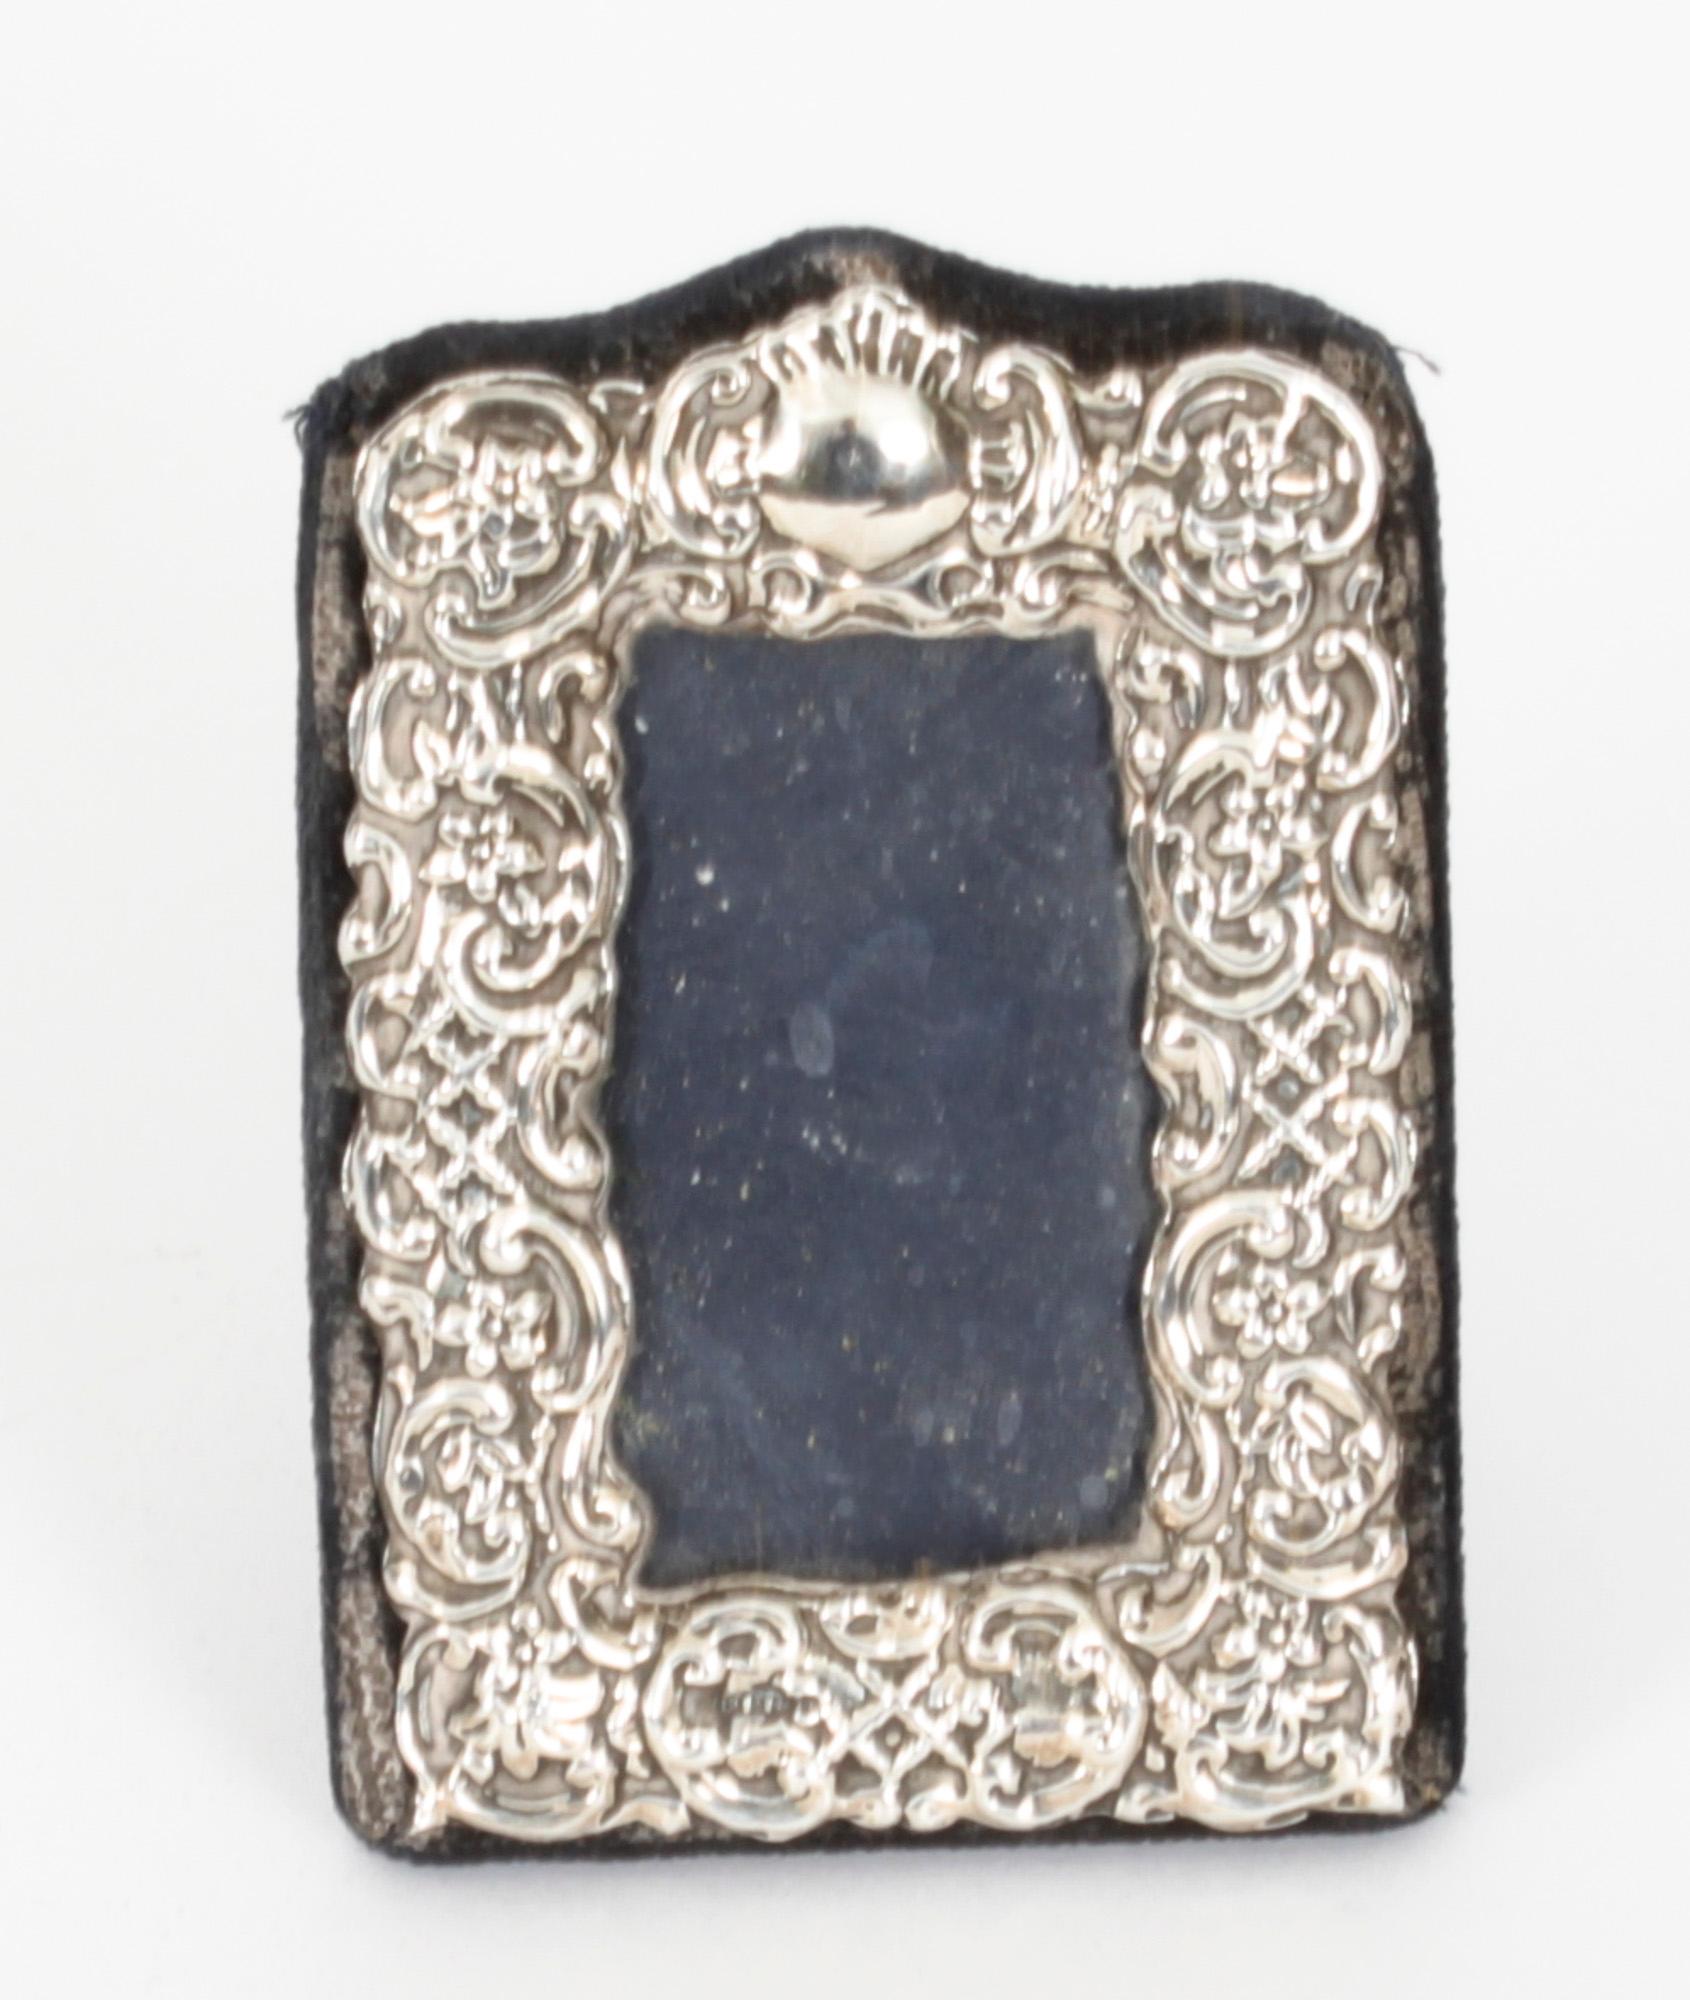 A truly superb patite decorative Antique Edwardian sterling silver photo frame. Assay marked for Boots of Birmingham and date letter h for 1907.

Beautifully decorated portrait frame with floral and scroll relief borders .

An excellent gift